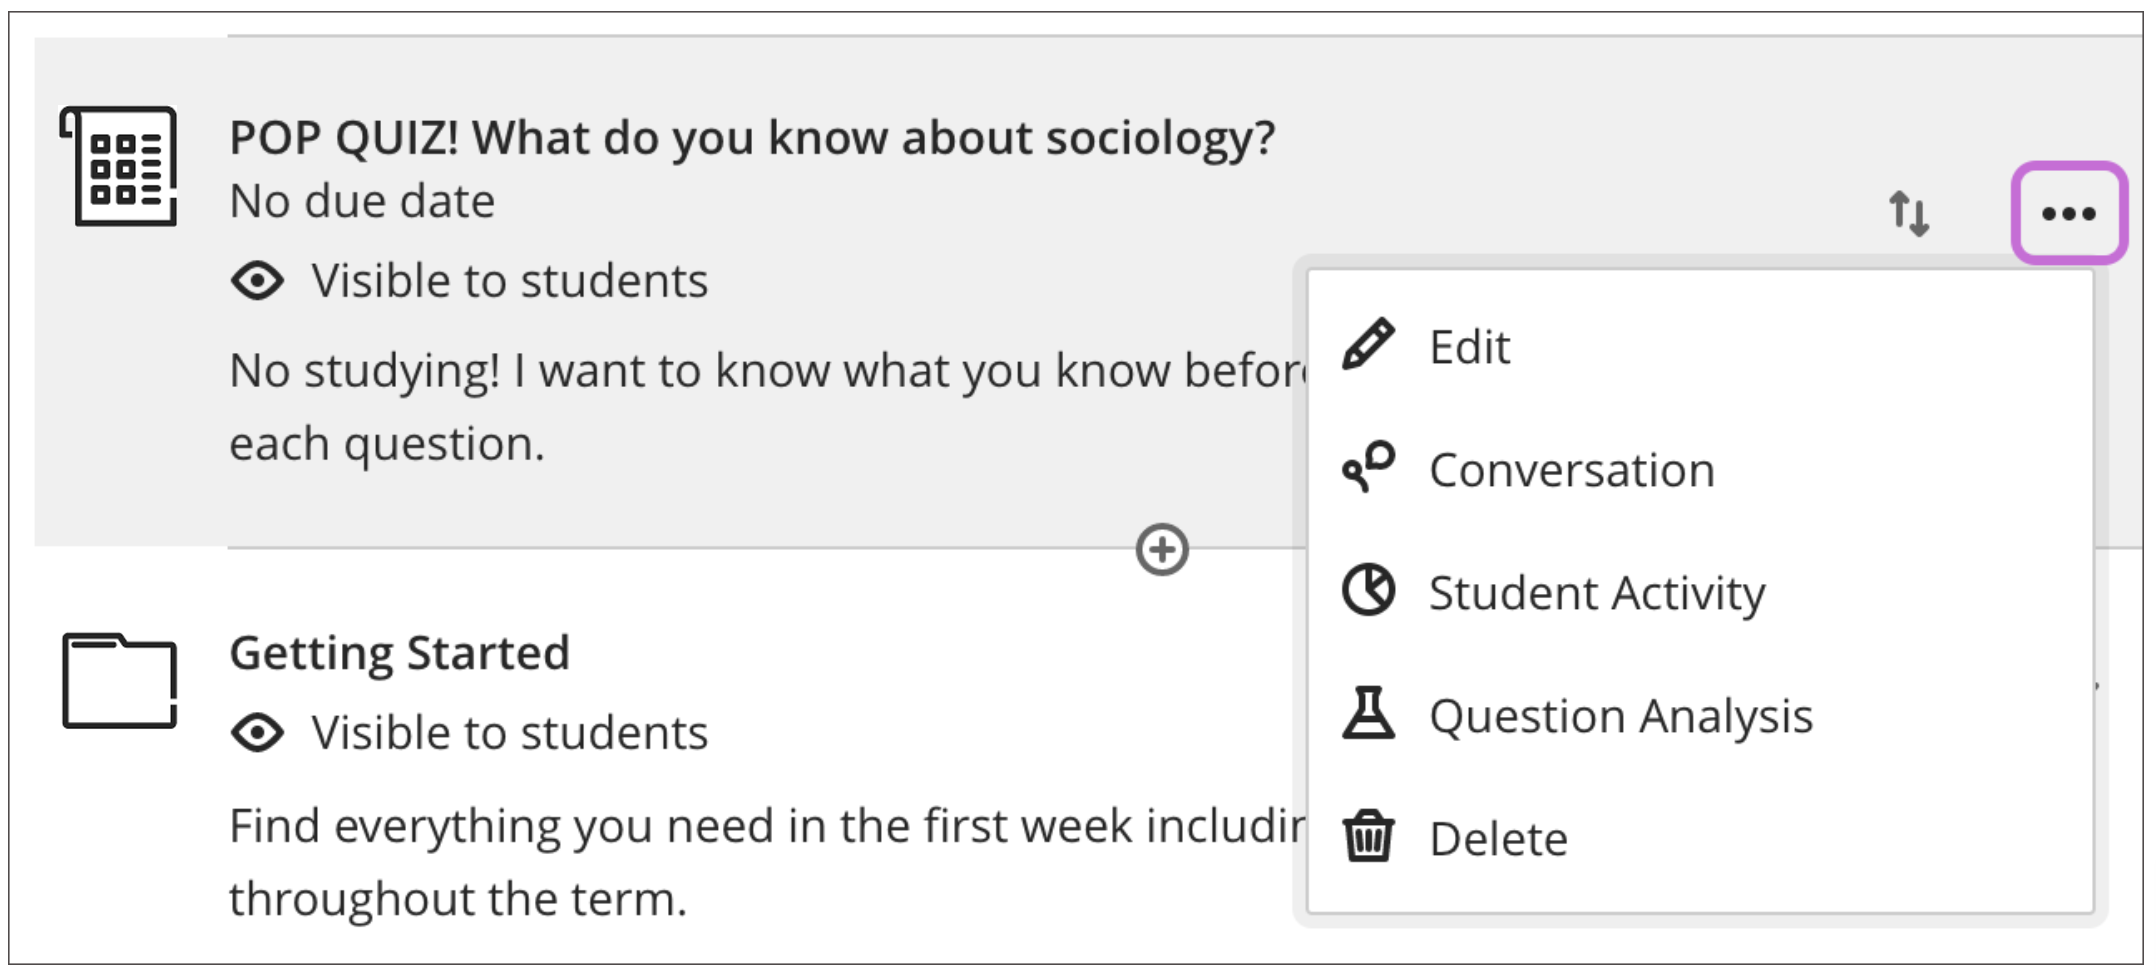 The menu on the top right-hand side opens a menu that lets you edit, start a conversation, see student’s activity, analyze questions or delete tests. 